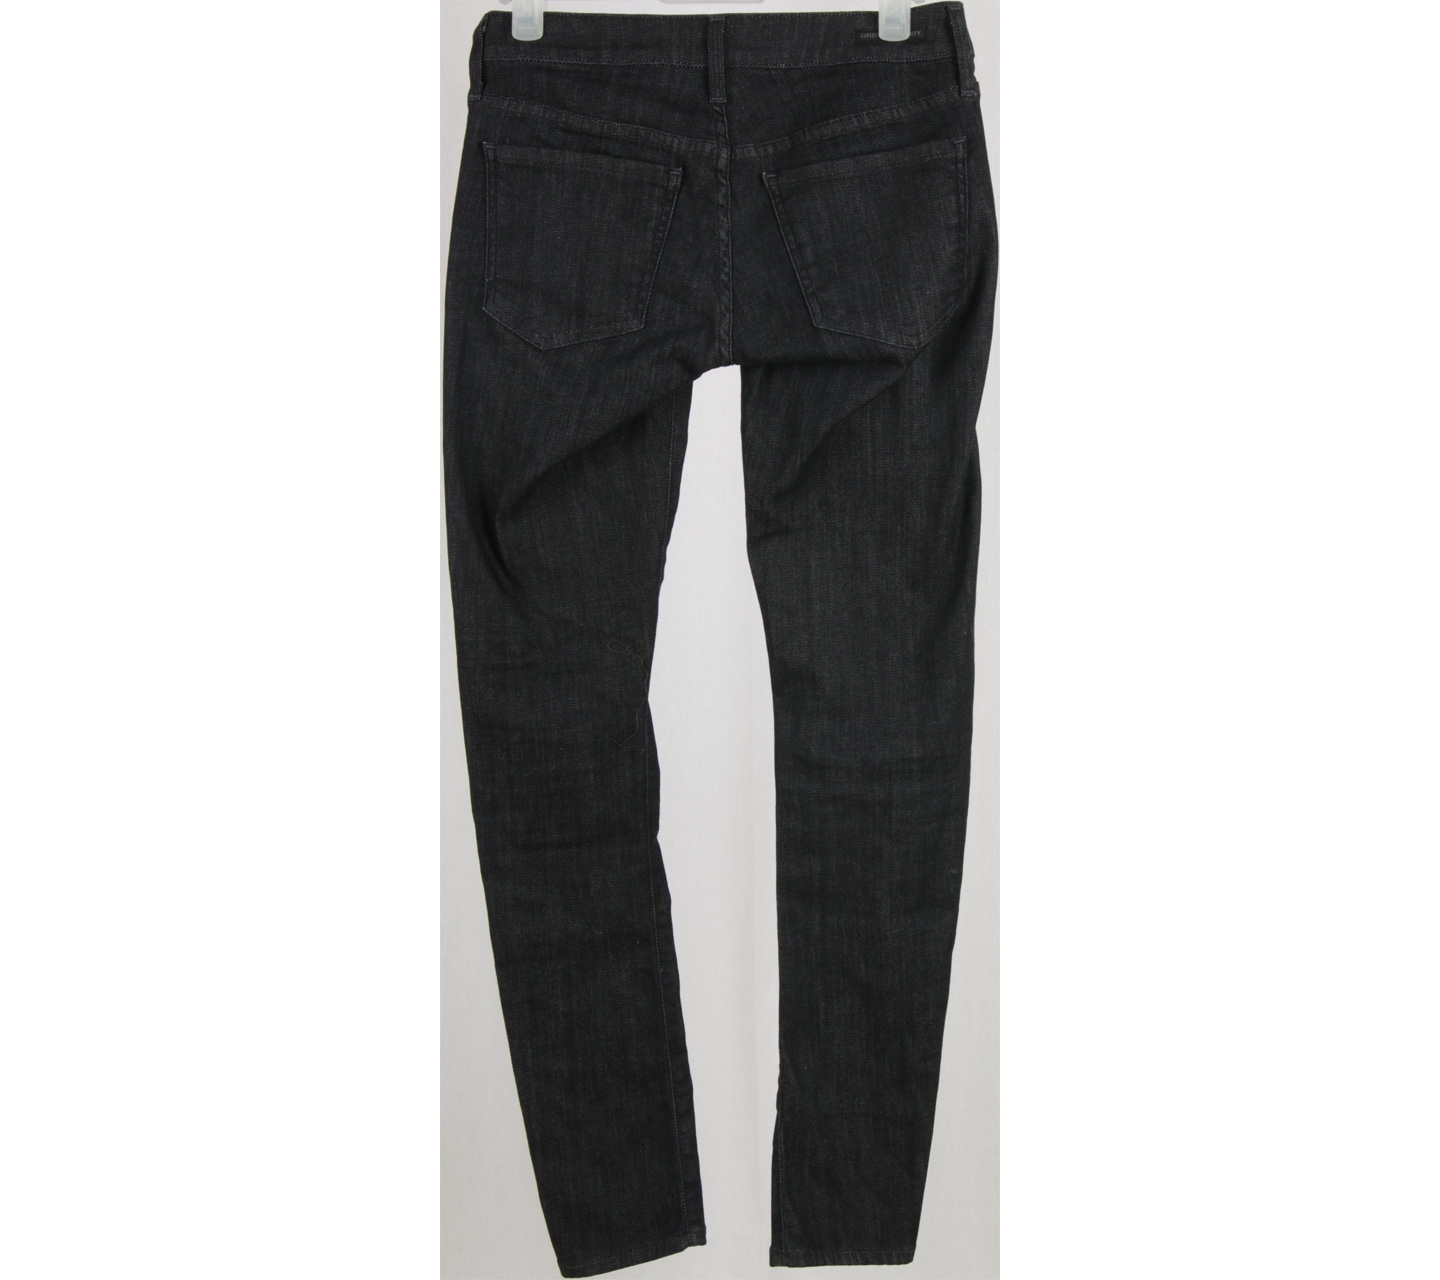 Citizens of Humanity Black Pants